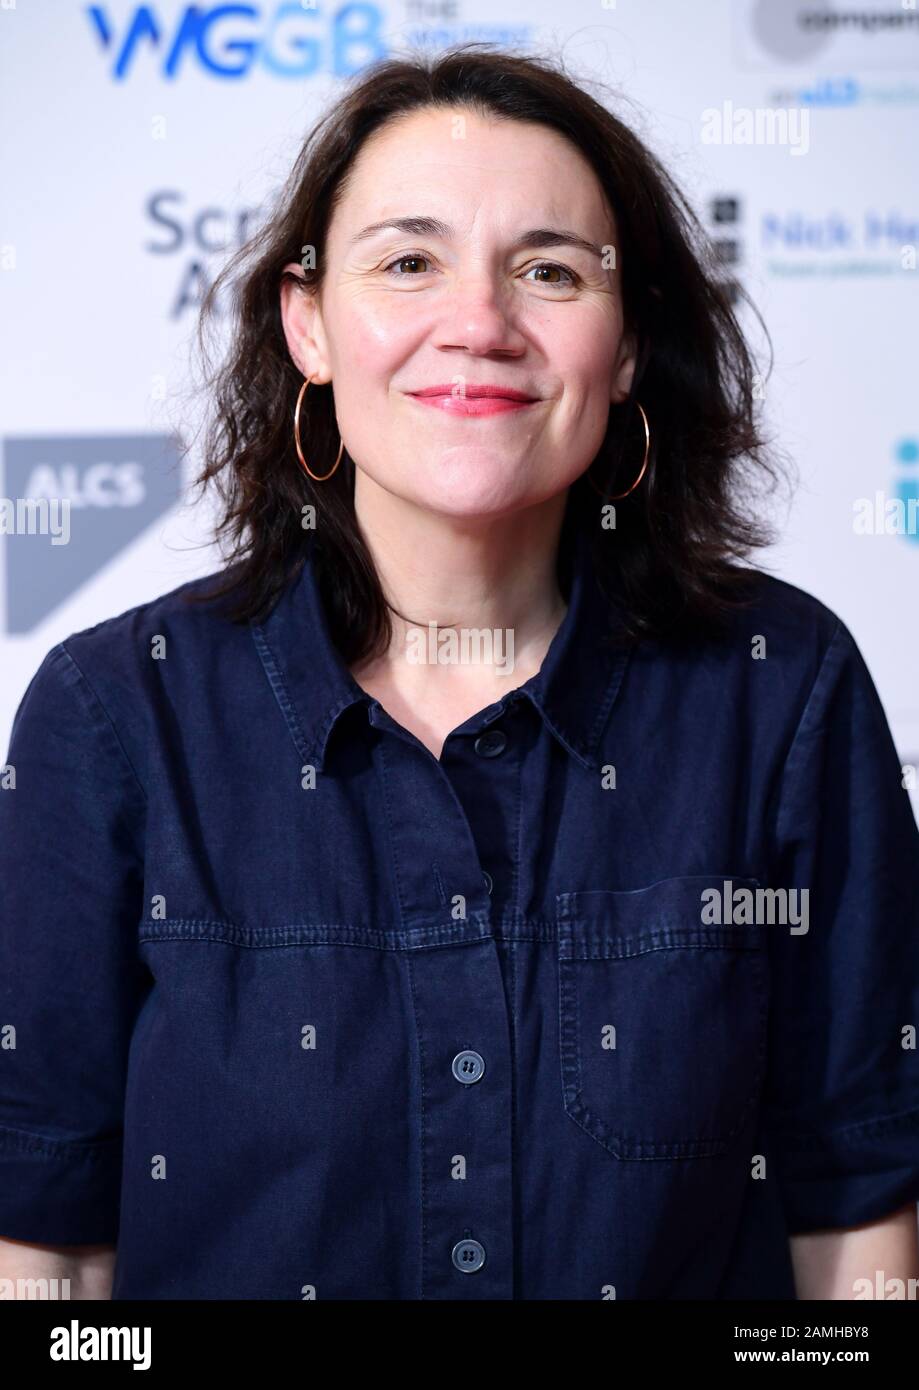 Katie Hims arrives at The Writers' Guild Awards 2020 held at the Royal College of Physicians, London. Stock Photo